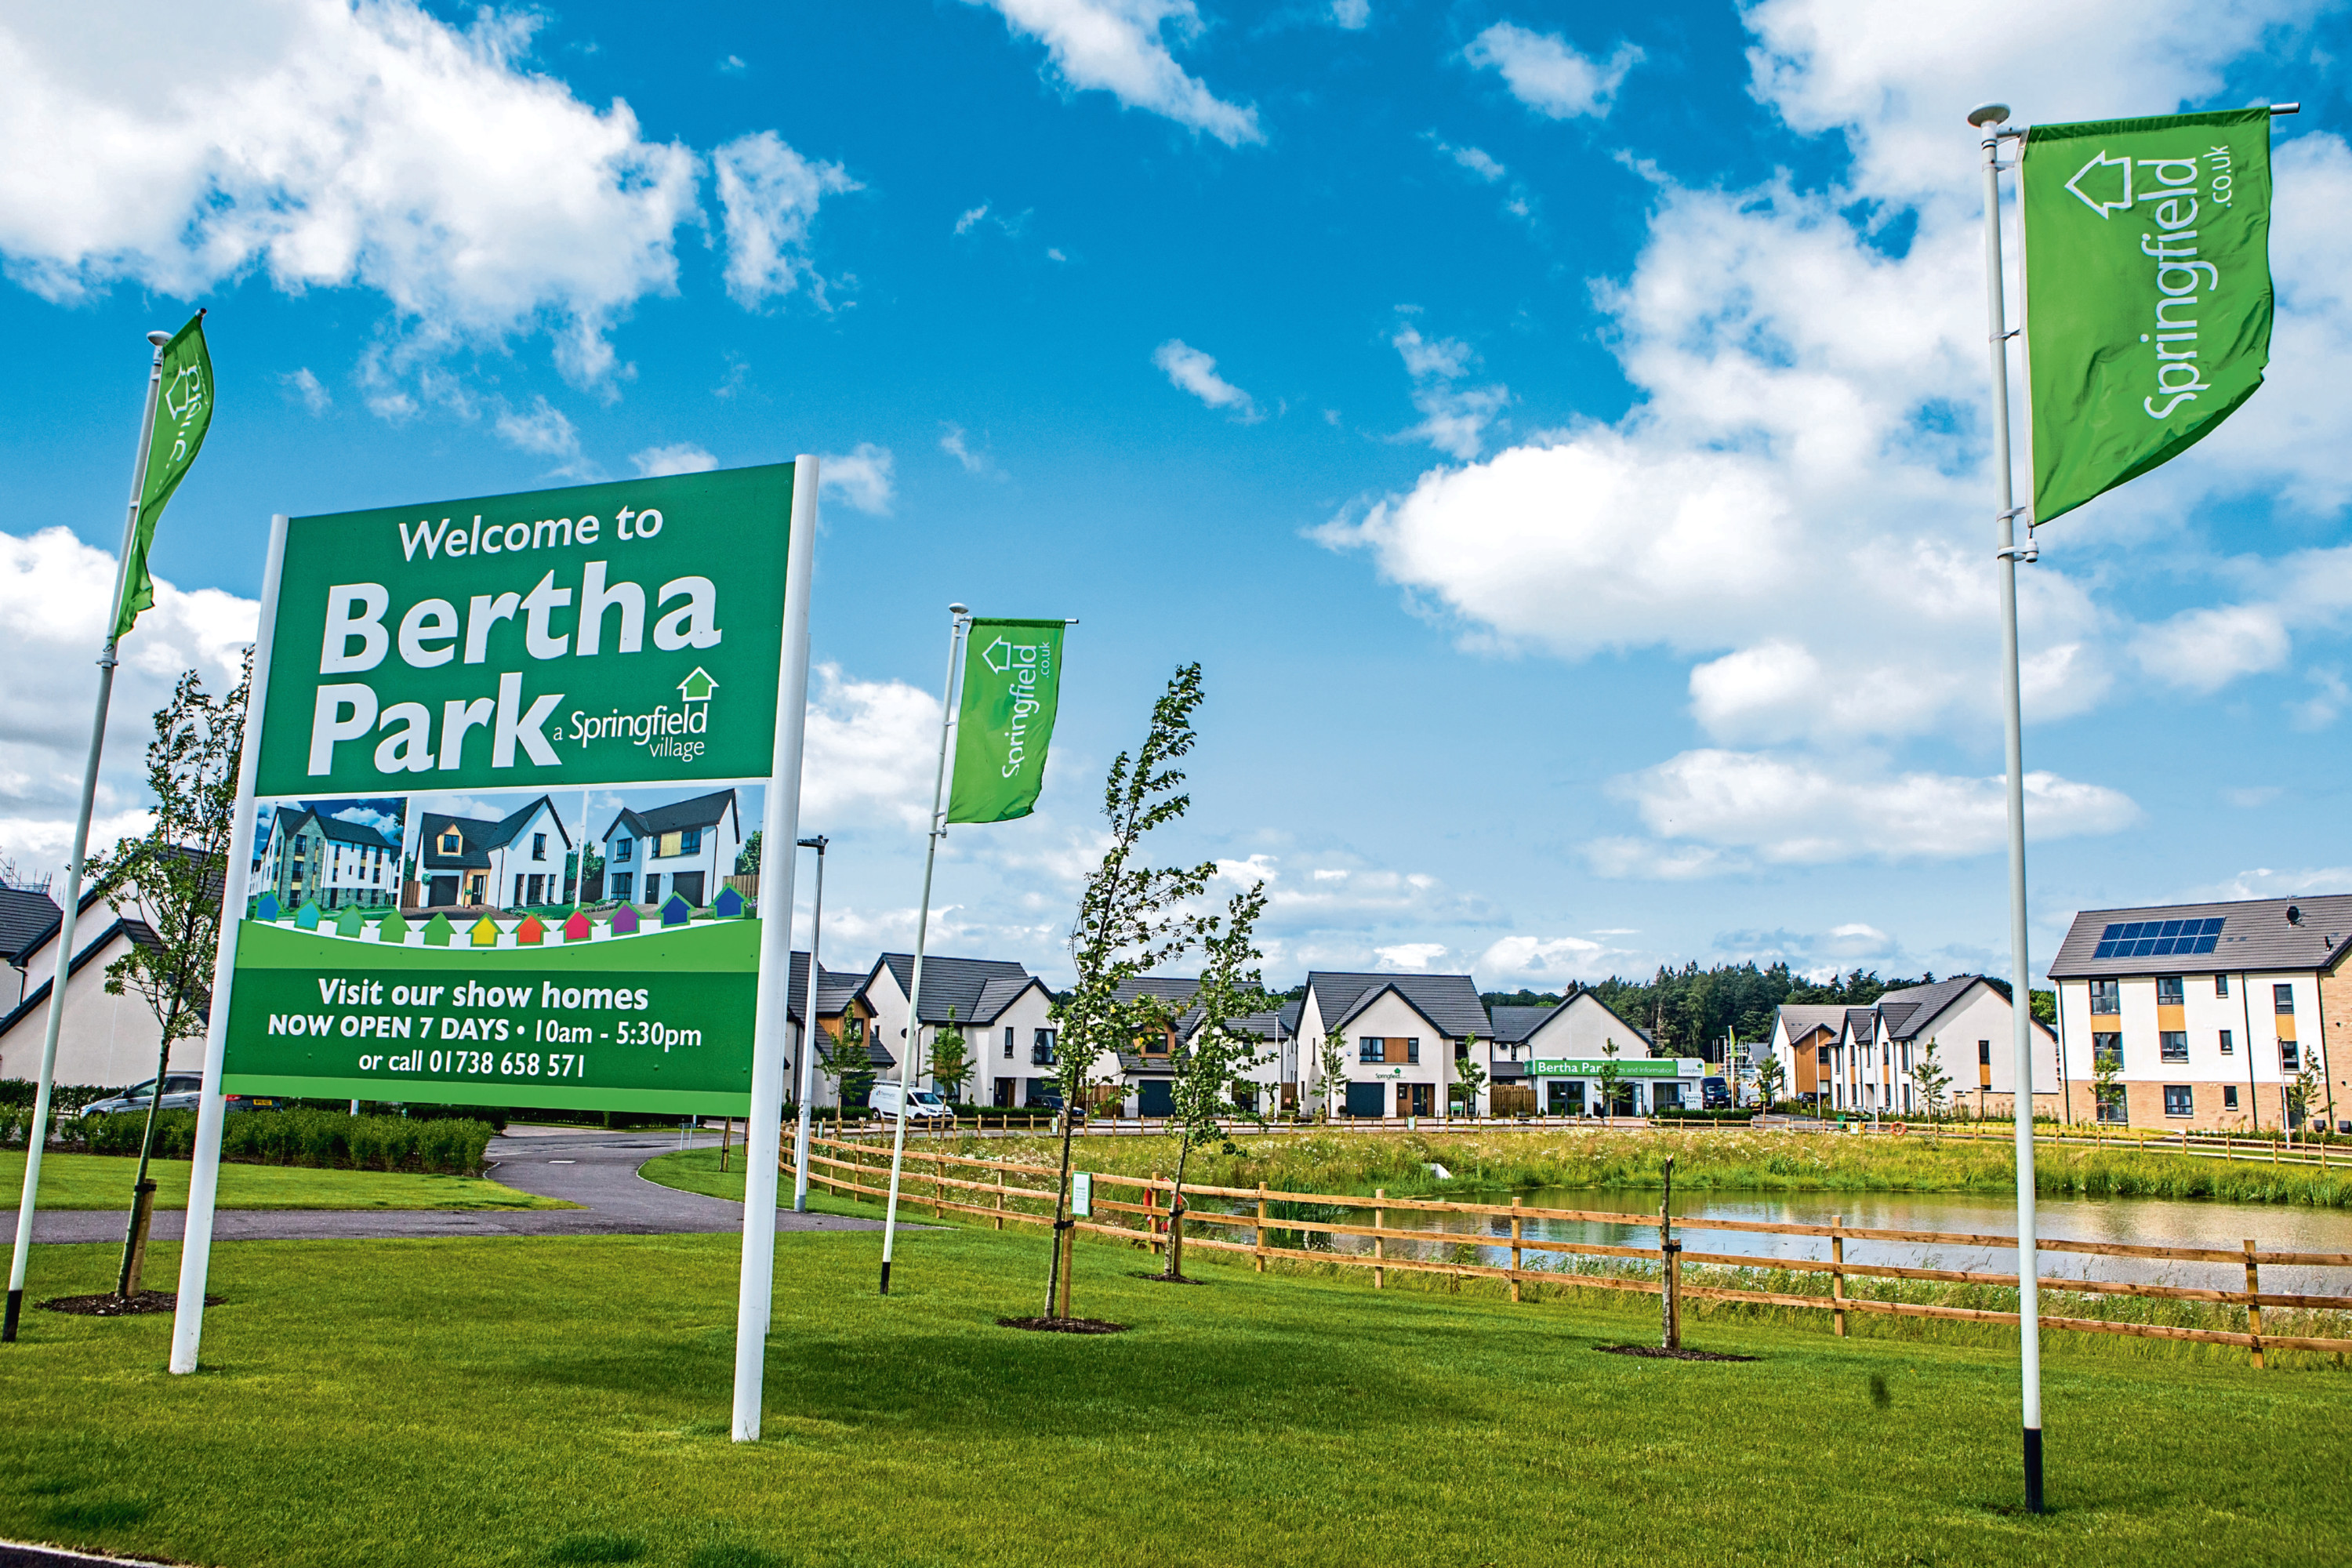 The Bertha Park development on the outskirts of Perth